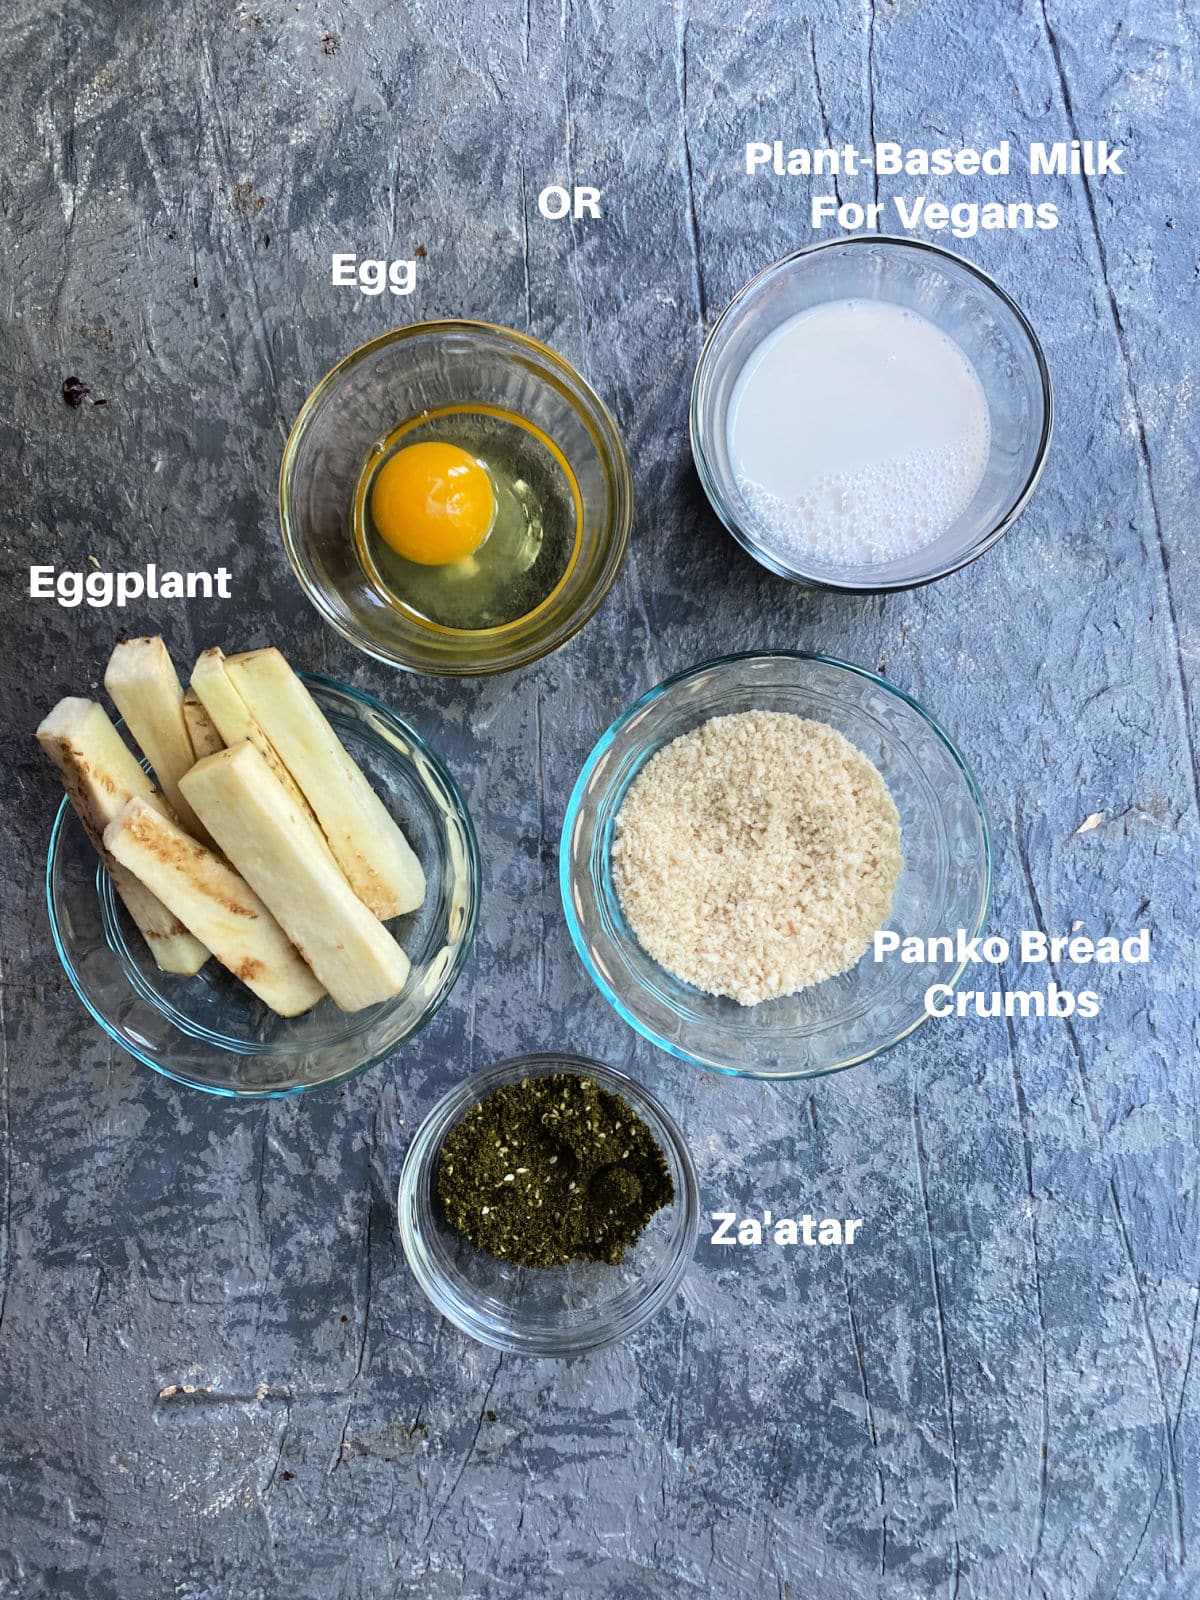 Ingredients for eggplant fries labeled
